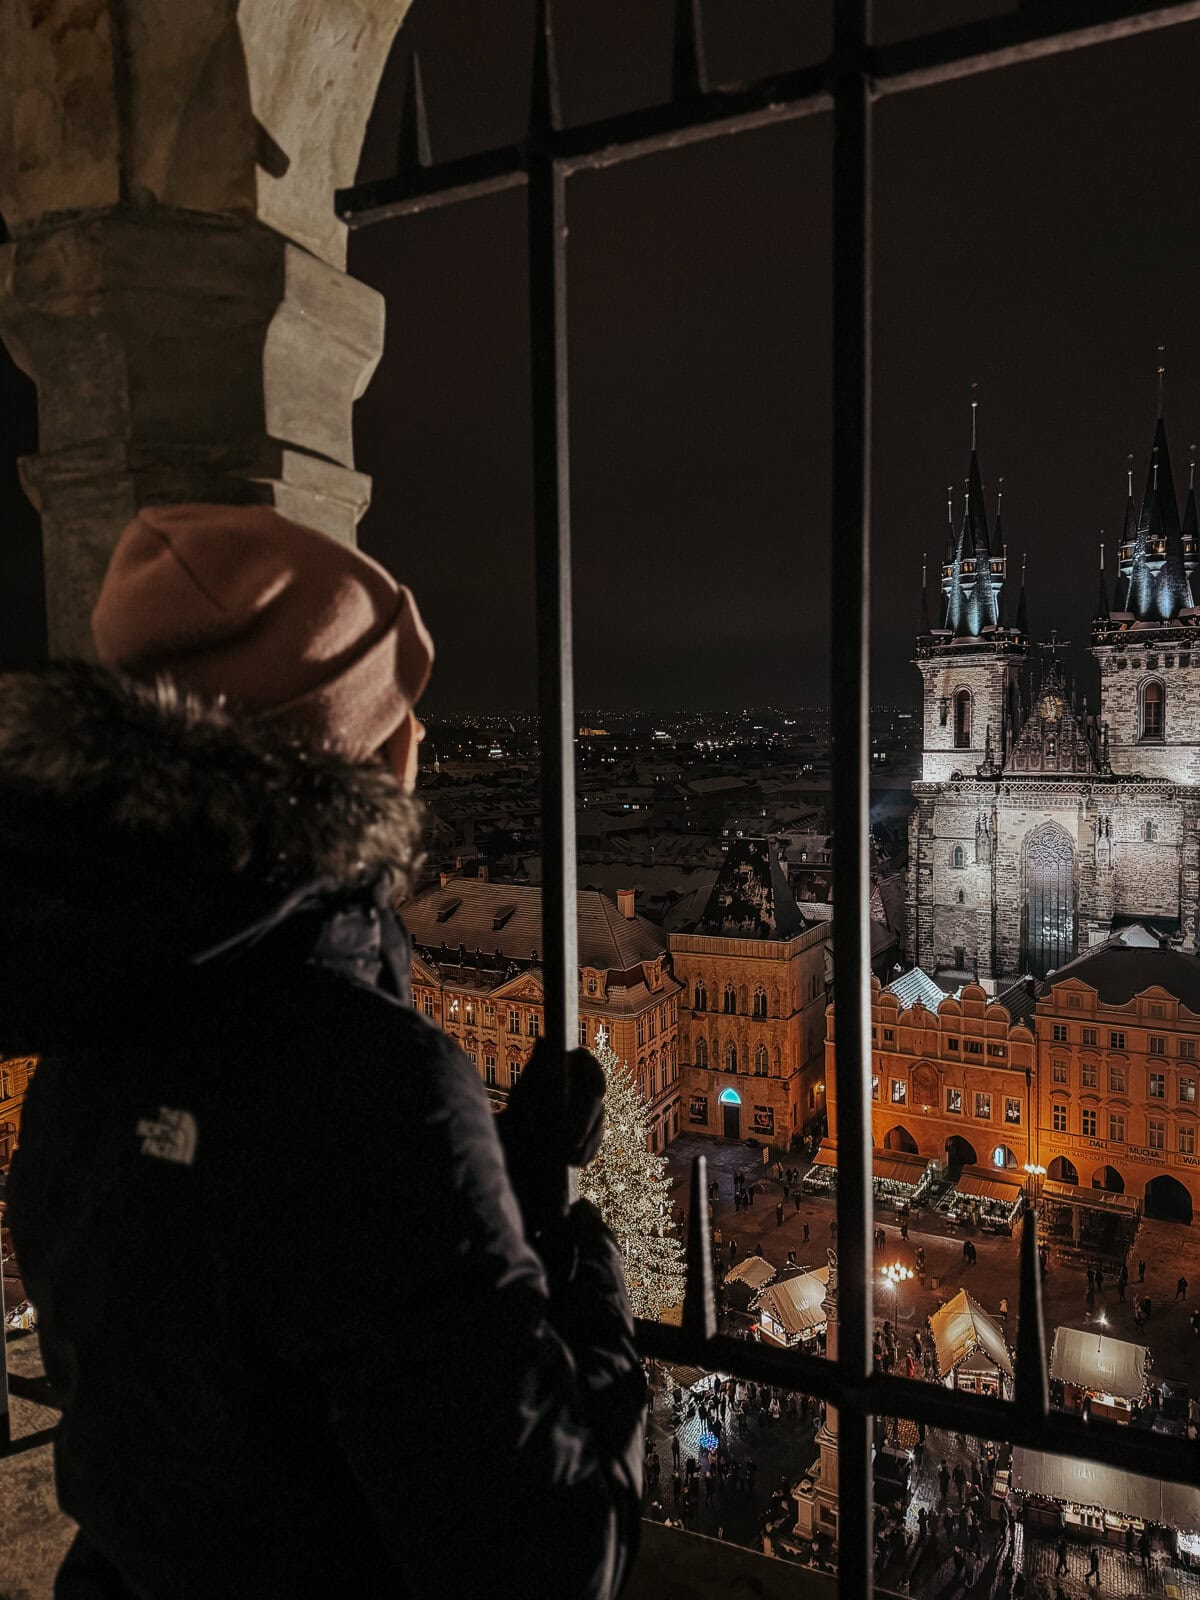 A woman overlooking the lit up Prague christmas market at night